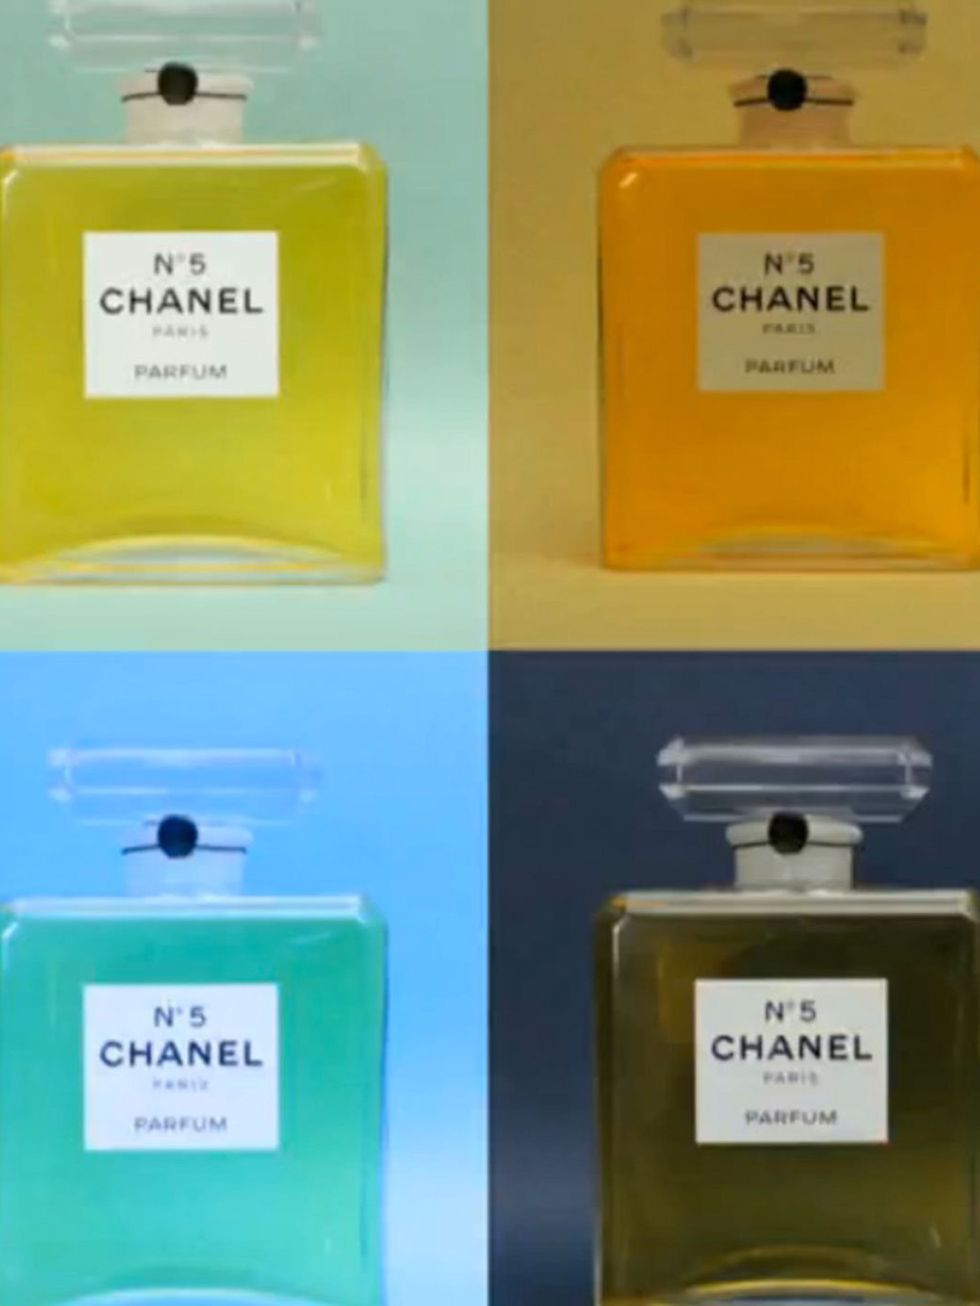 <p>Chanel No5 - 'For the First Time' film </p>